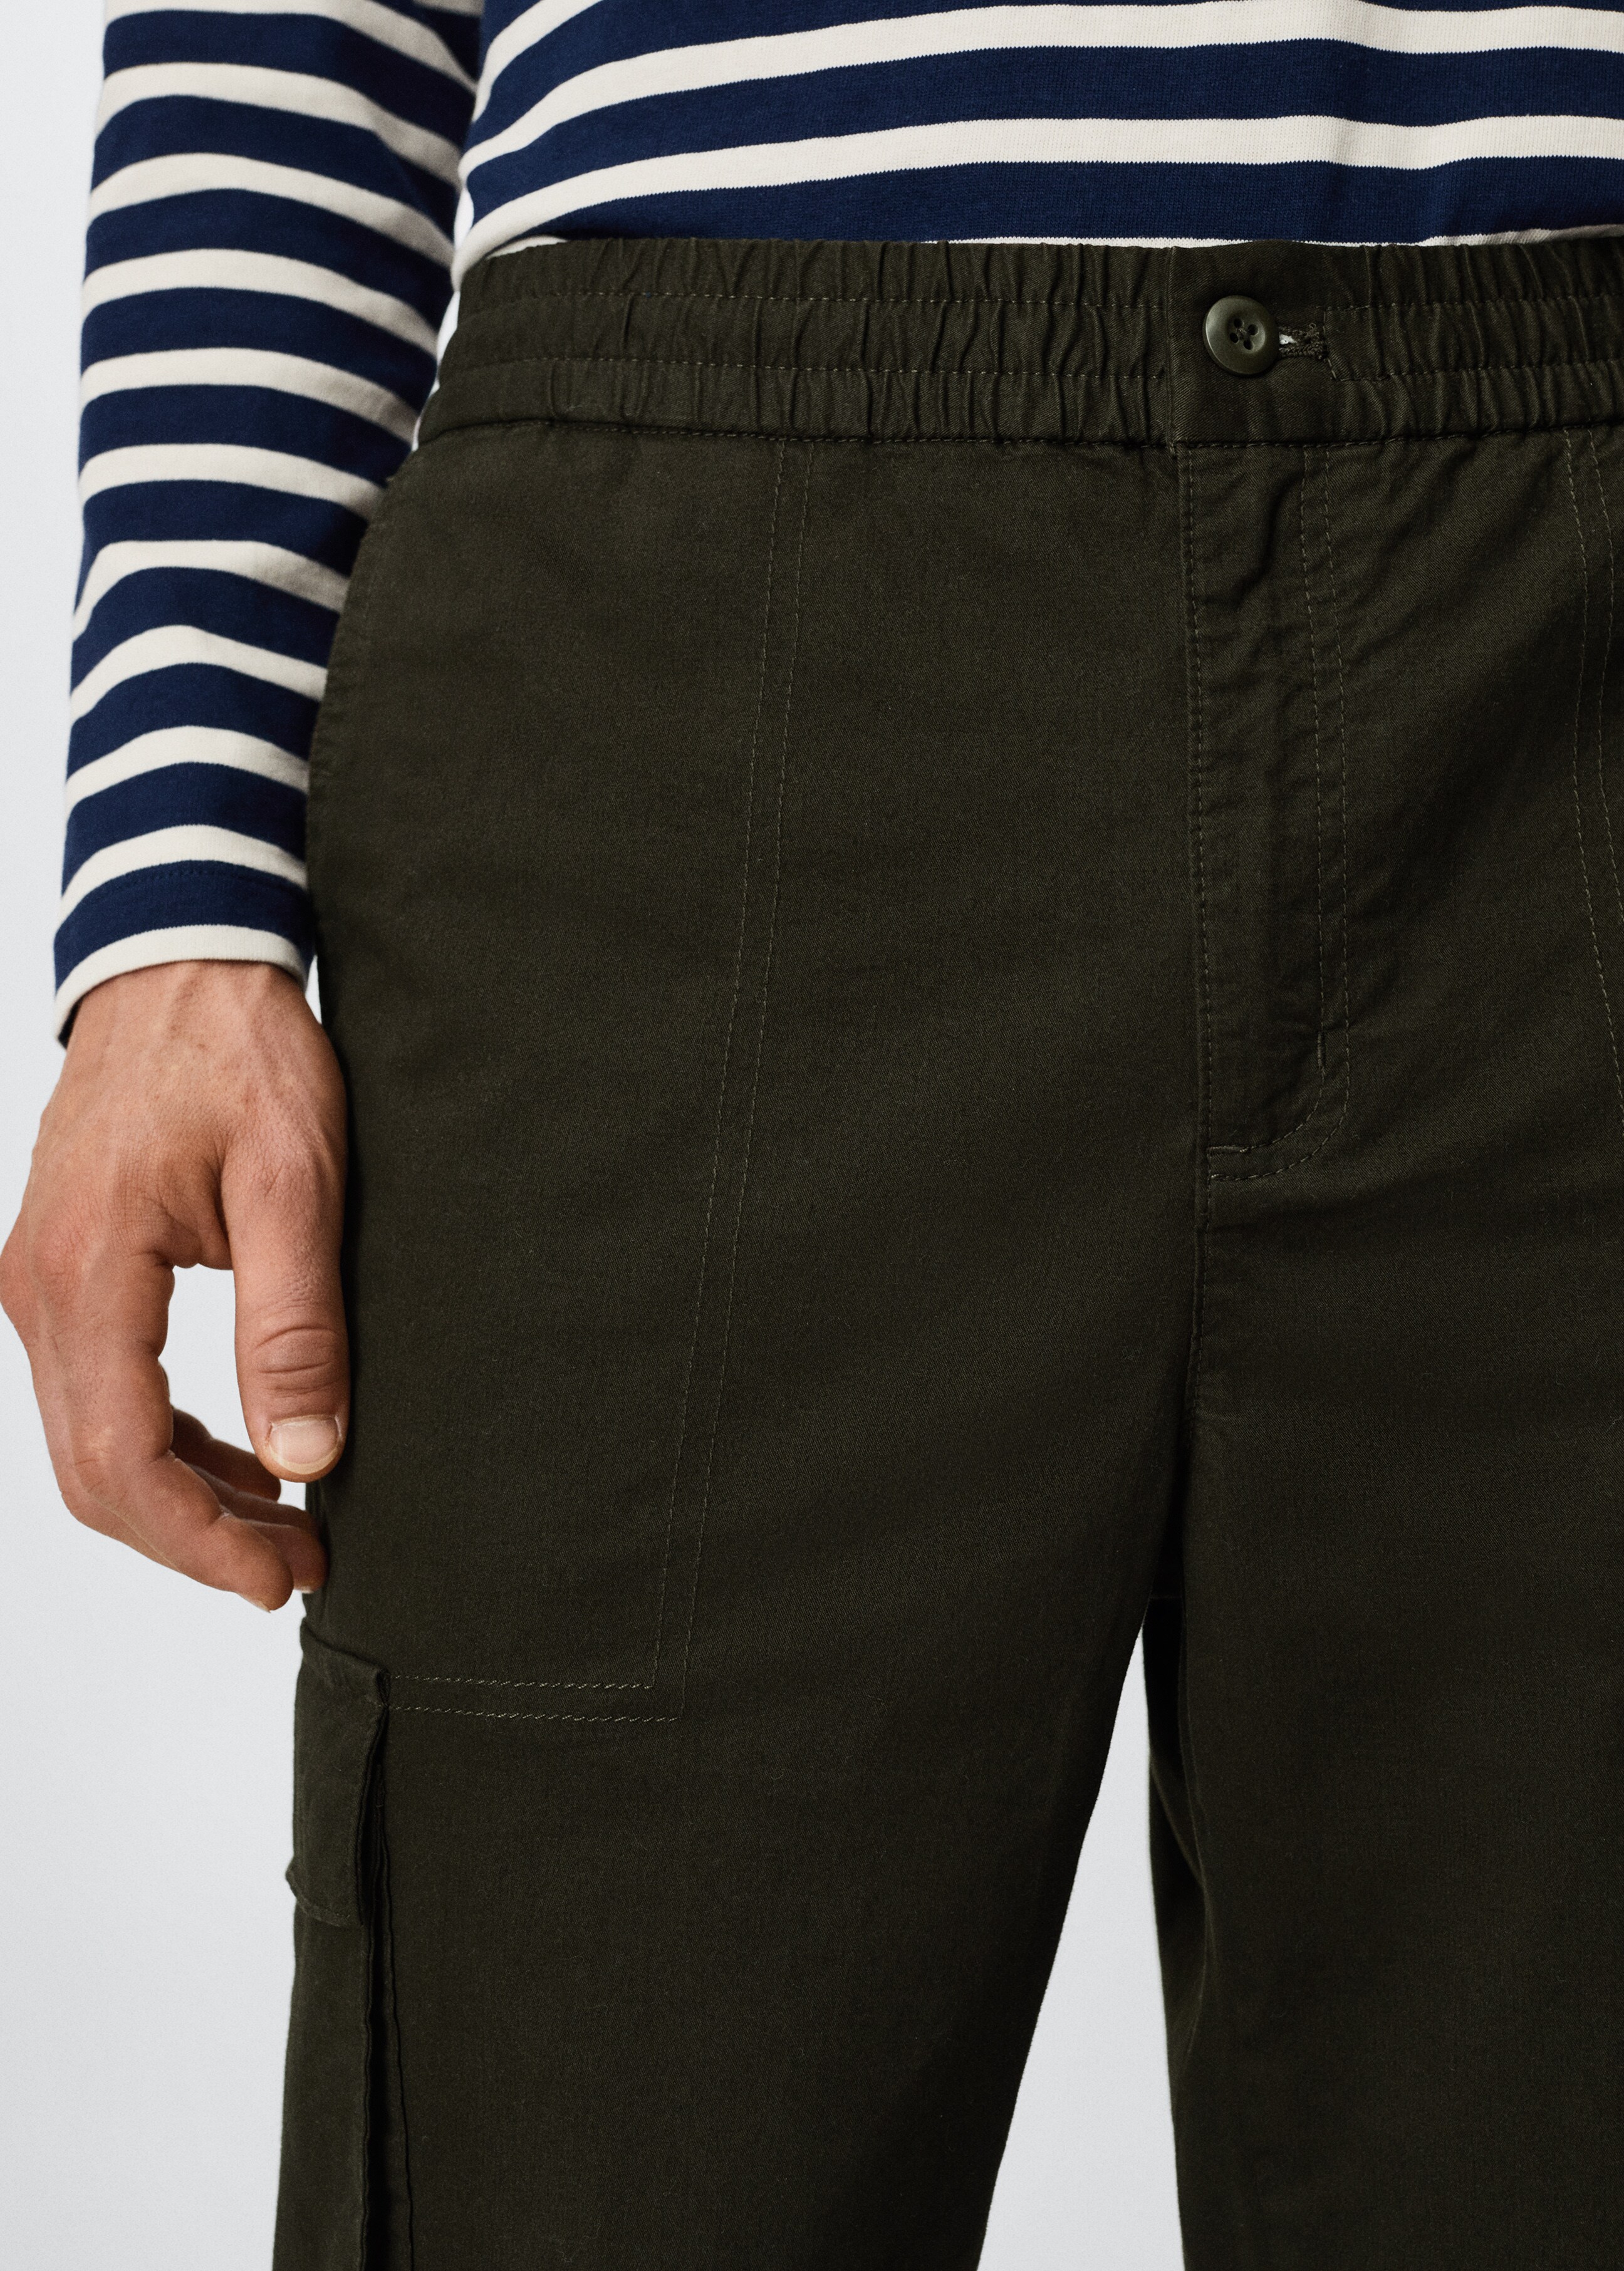 Cotton cargo pants - Details of the article 1